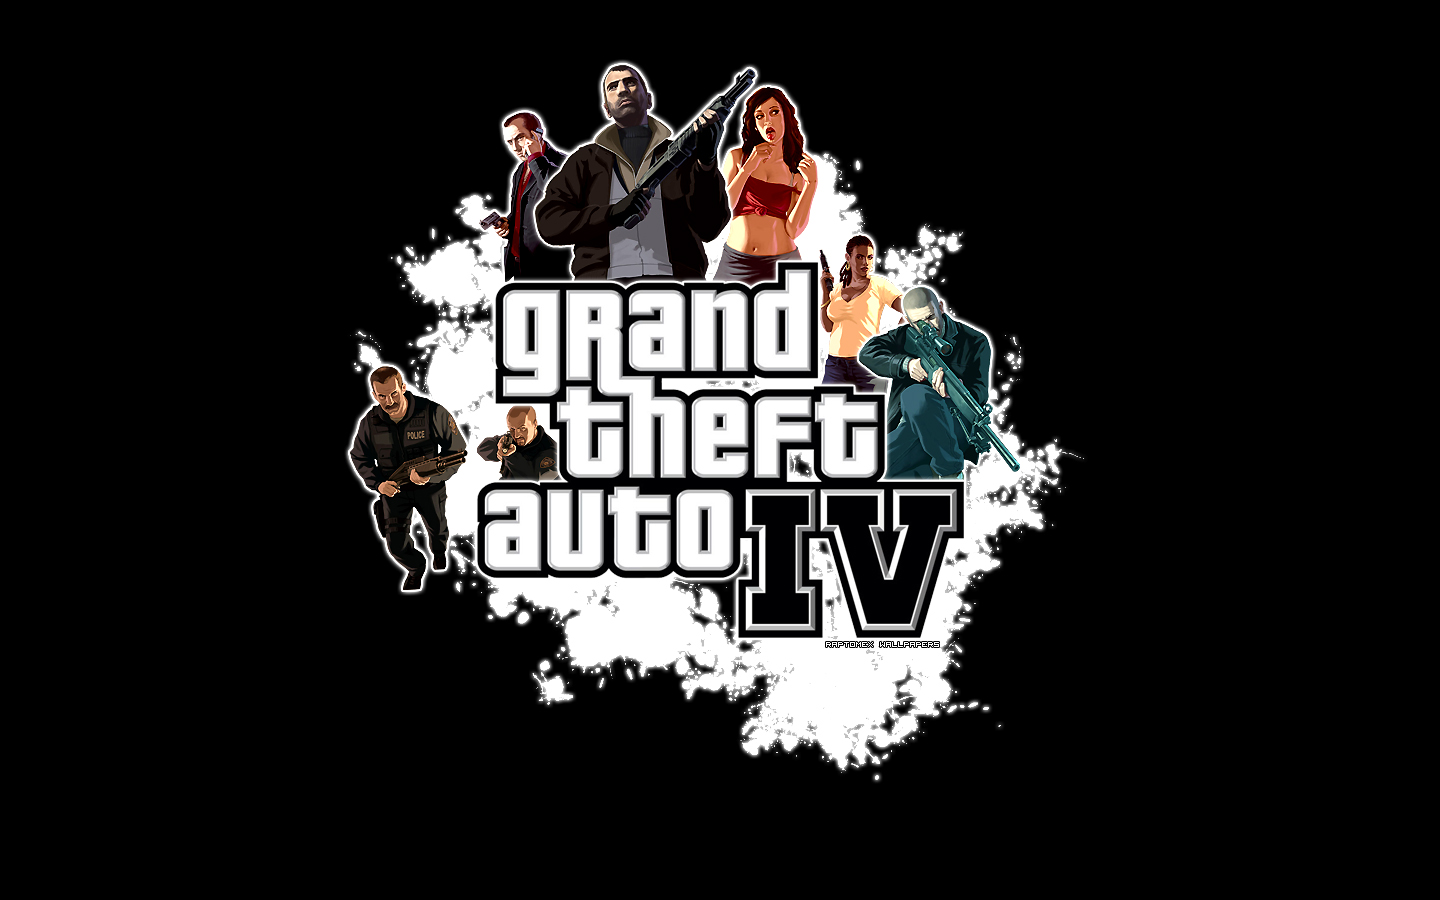 Grand Theft Auto IV Wallpaper by Raptomex